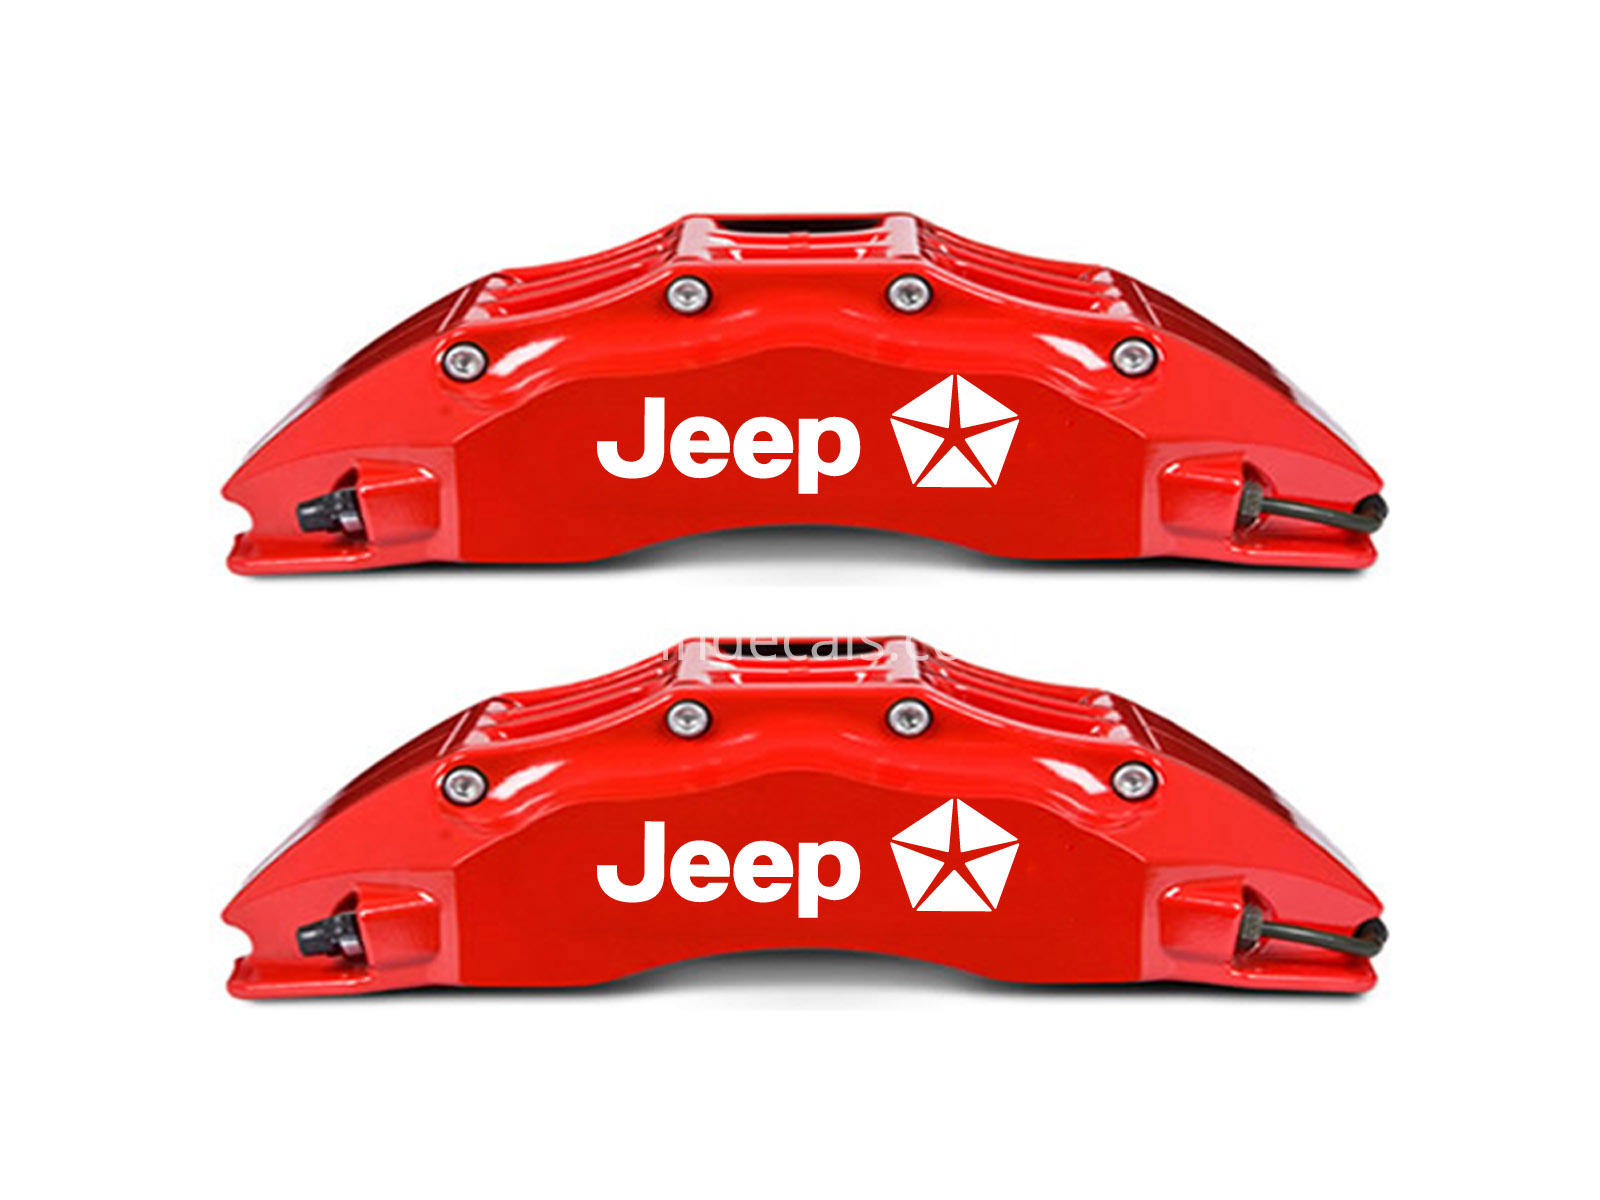 6 x Jeep Stickers for Brakes - White